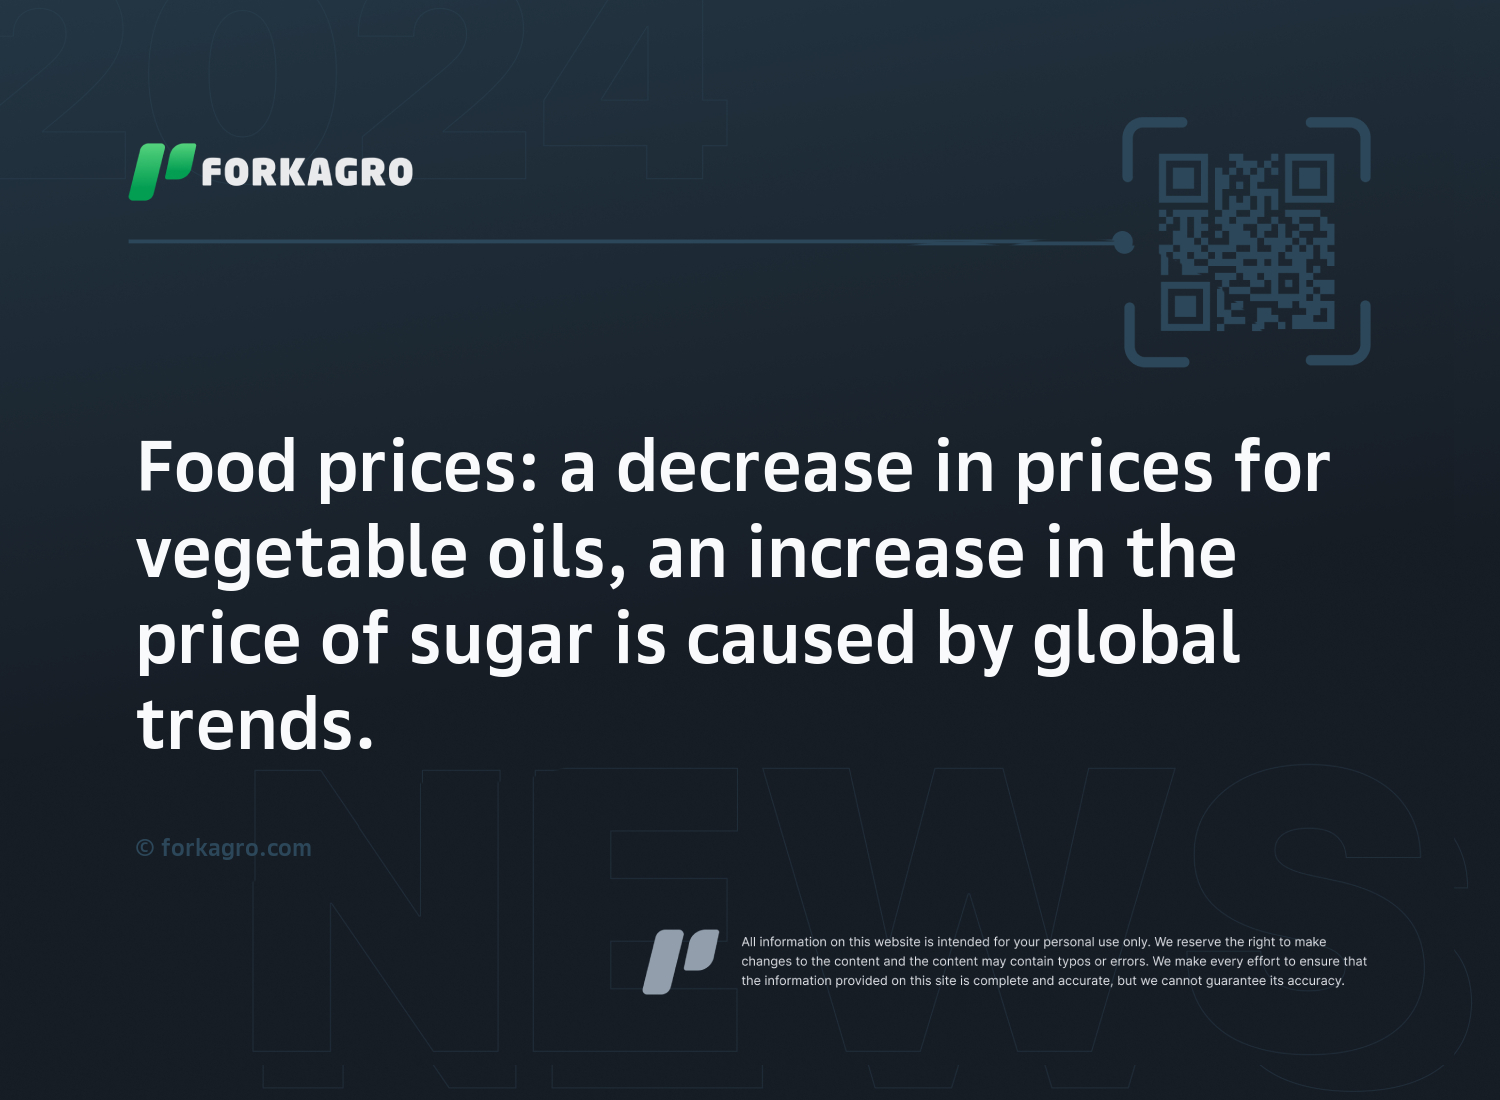 Food prices: a decrease in prices for vegetable oils, an increase in the price of sugar is caused by global trends.